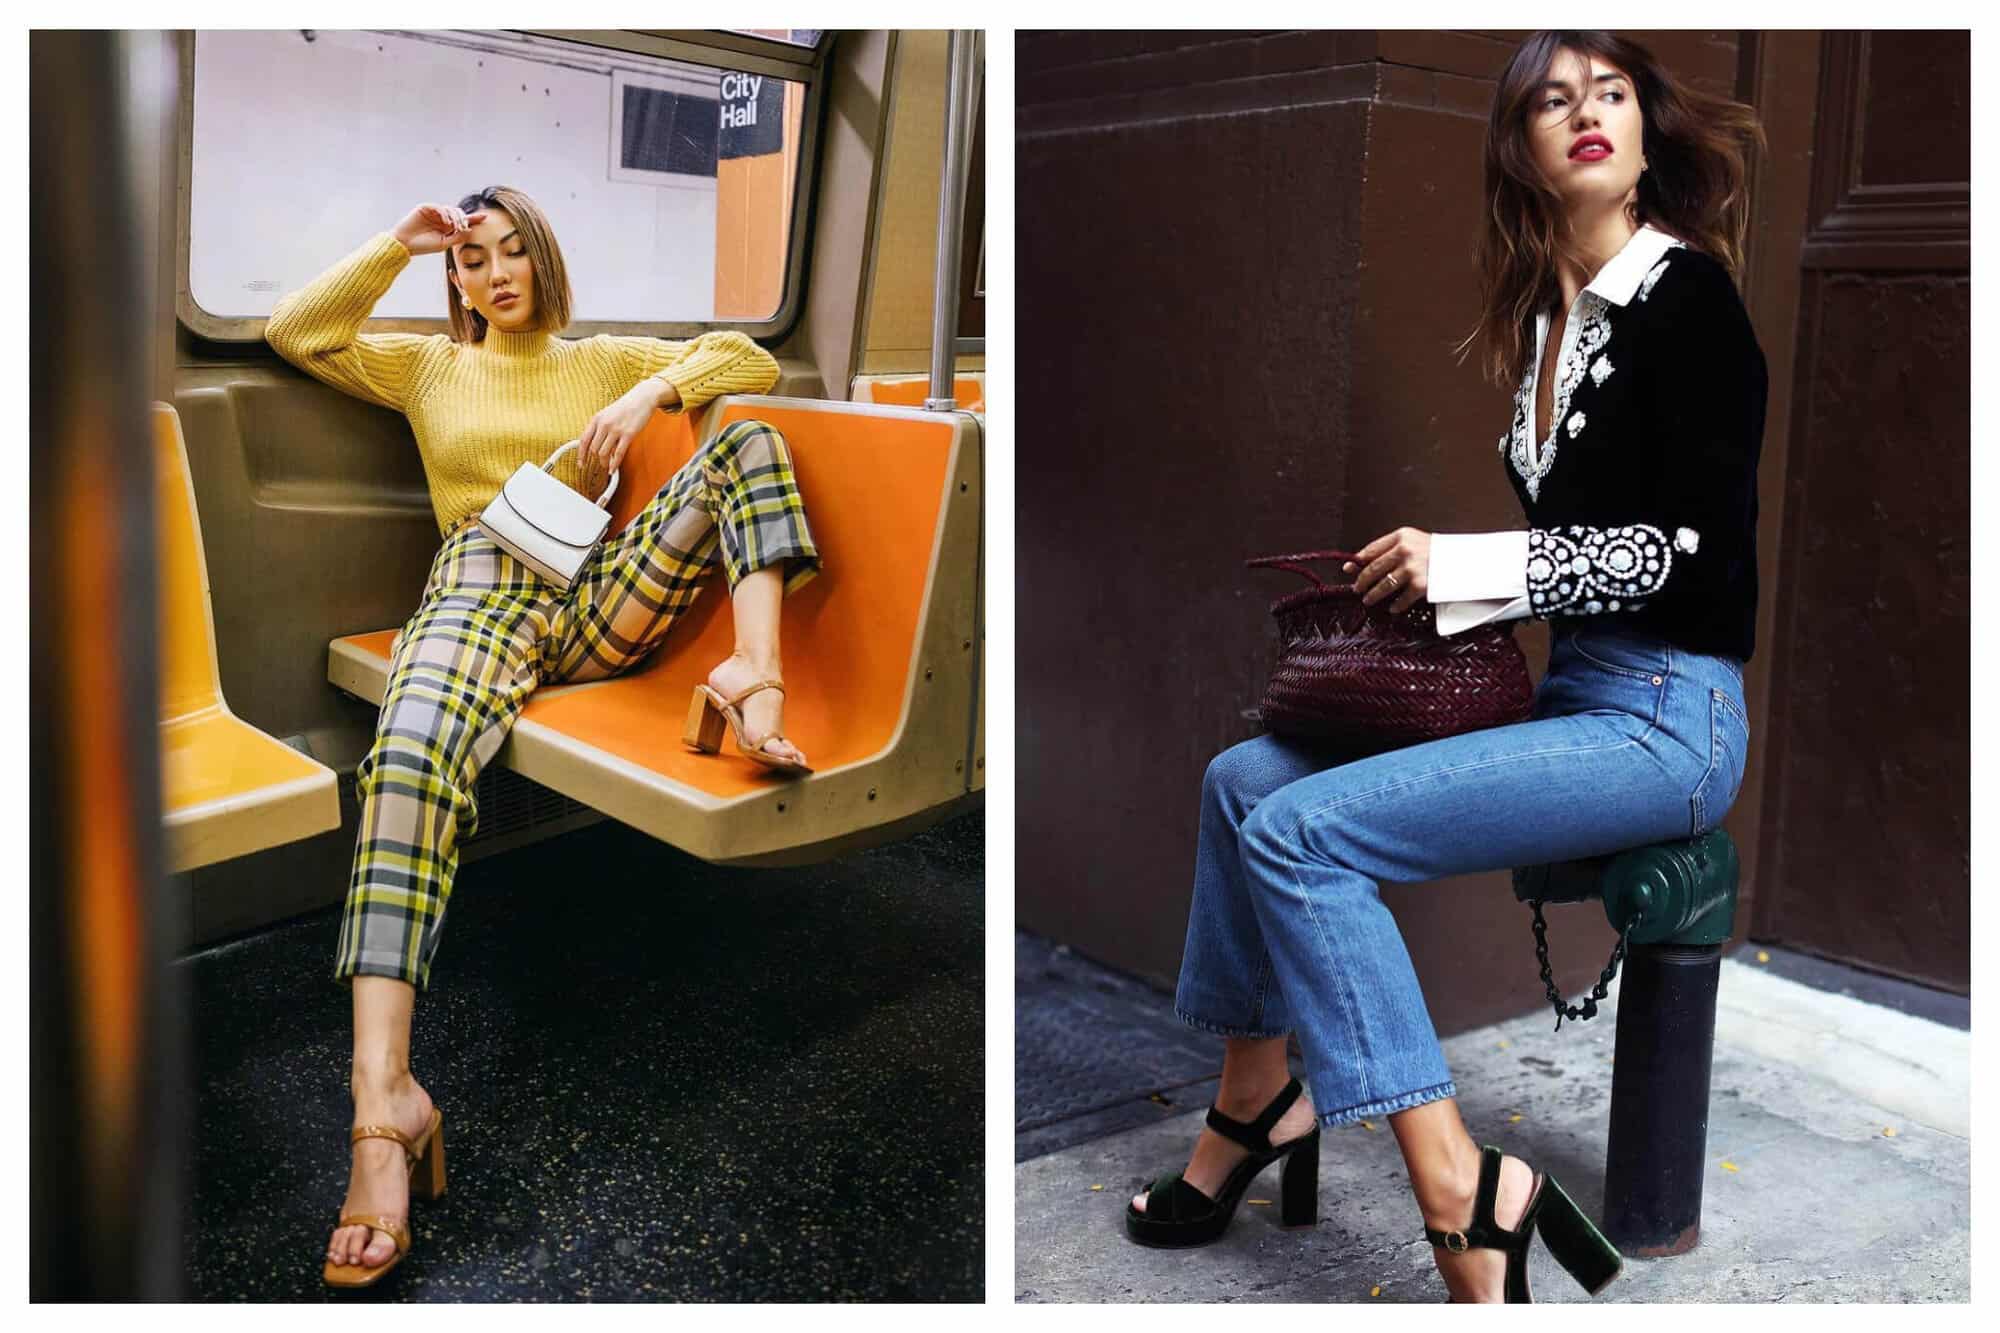 Left: Fashion blogger Jessica Wang is casually sitting inside a NYC subway train, in the iconic orange and yellow seats of RW train. They are at the City Hall stop in downtown Manhattan. She is wearing a yellow knitted long-sleeved top, black and yellow plaid cigarette pants, brown heeled sandals, and a white little purse. Right: French fashion princess Jeanne Damas is sitting in a dark green fire hydrant. She is wearing a black long-sleeved top (embellished with crystals on her forearms and chest and with white collar and cuffs), denim straight-cut fitted jeans, dark green velvety heeled sandals and a garnet braided basket handbag. The fire hydrant and her shoes are of the same color.